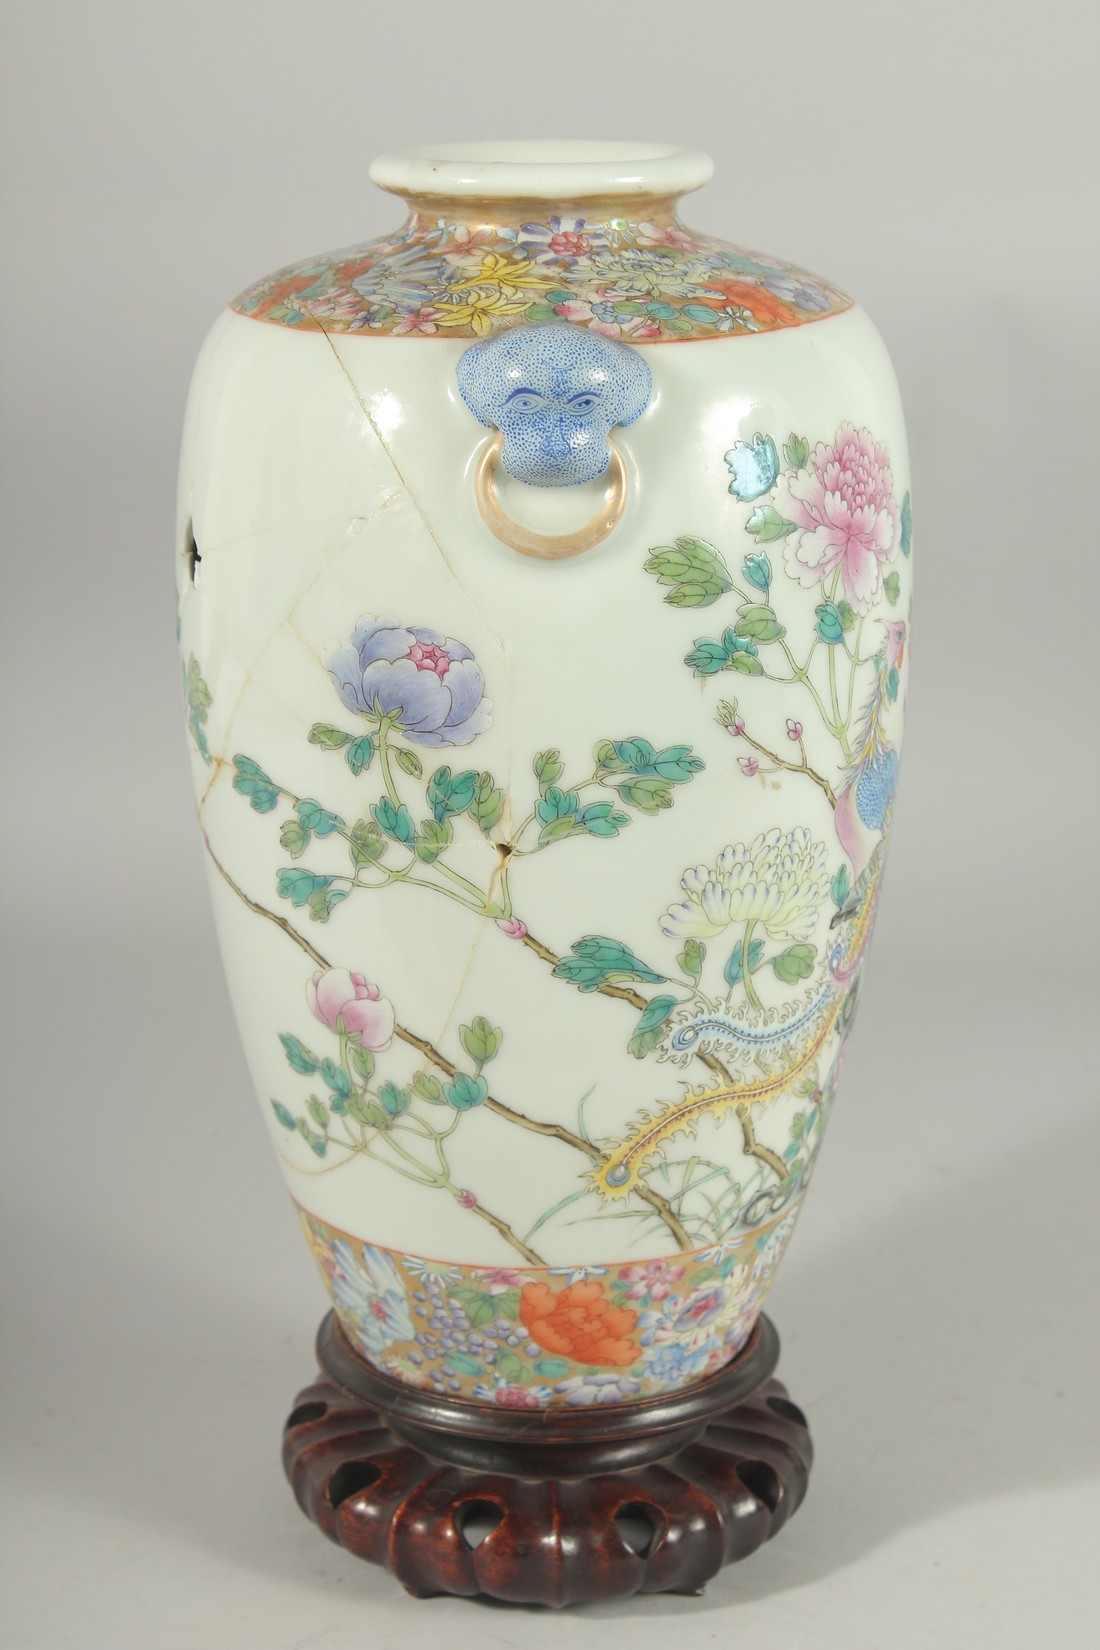 A CHINESE FAMILLE ROSE PORCELAIN VASE on hardwood stand, painted with exotic birds and native flora, - Image 2 of 7